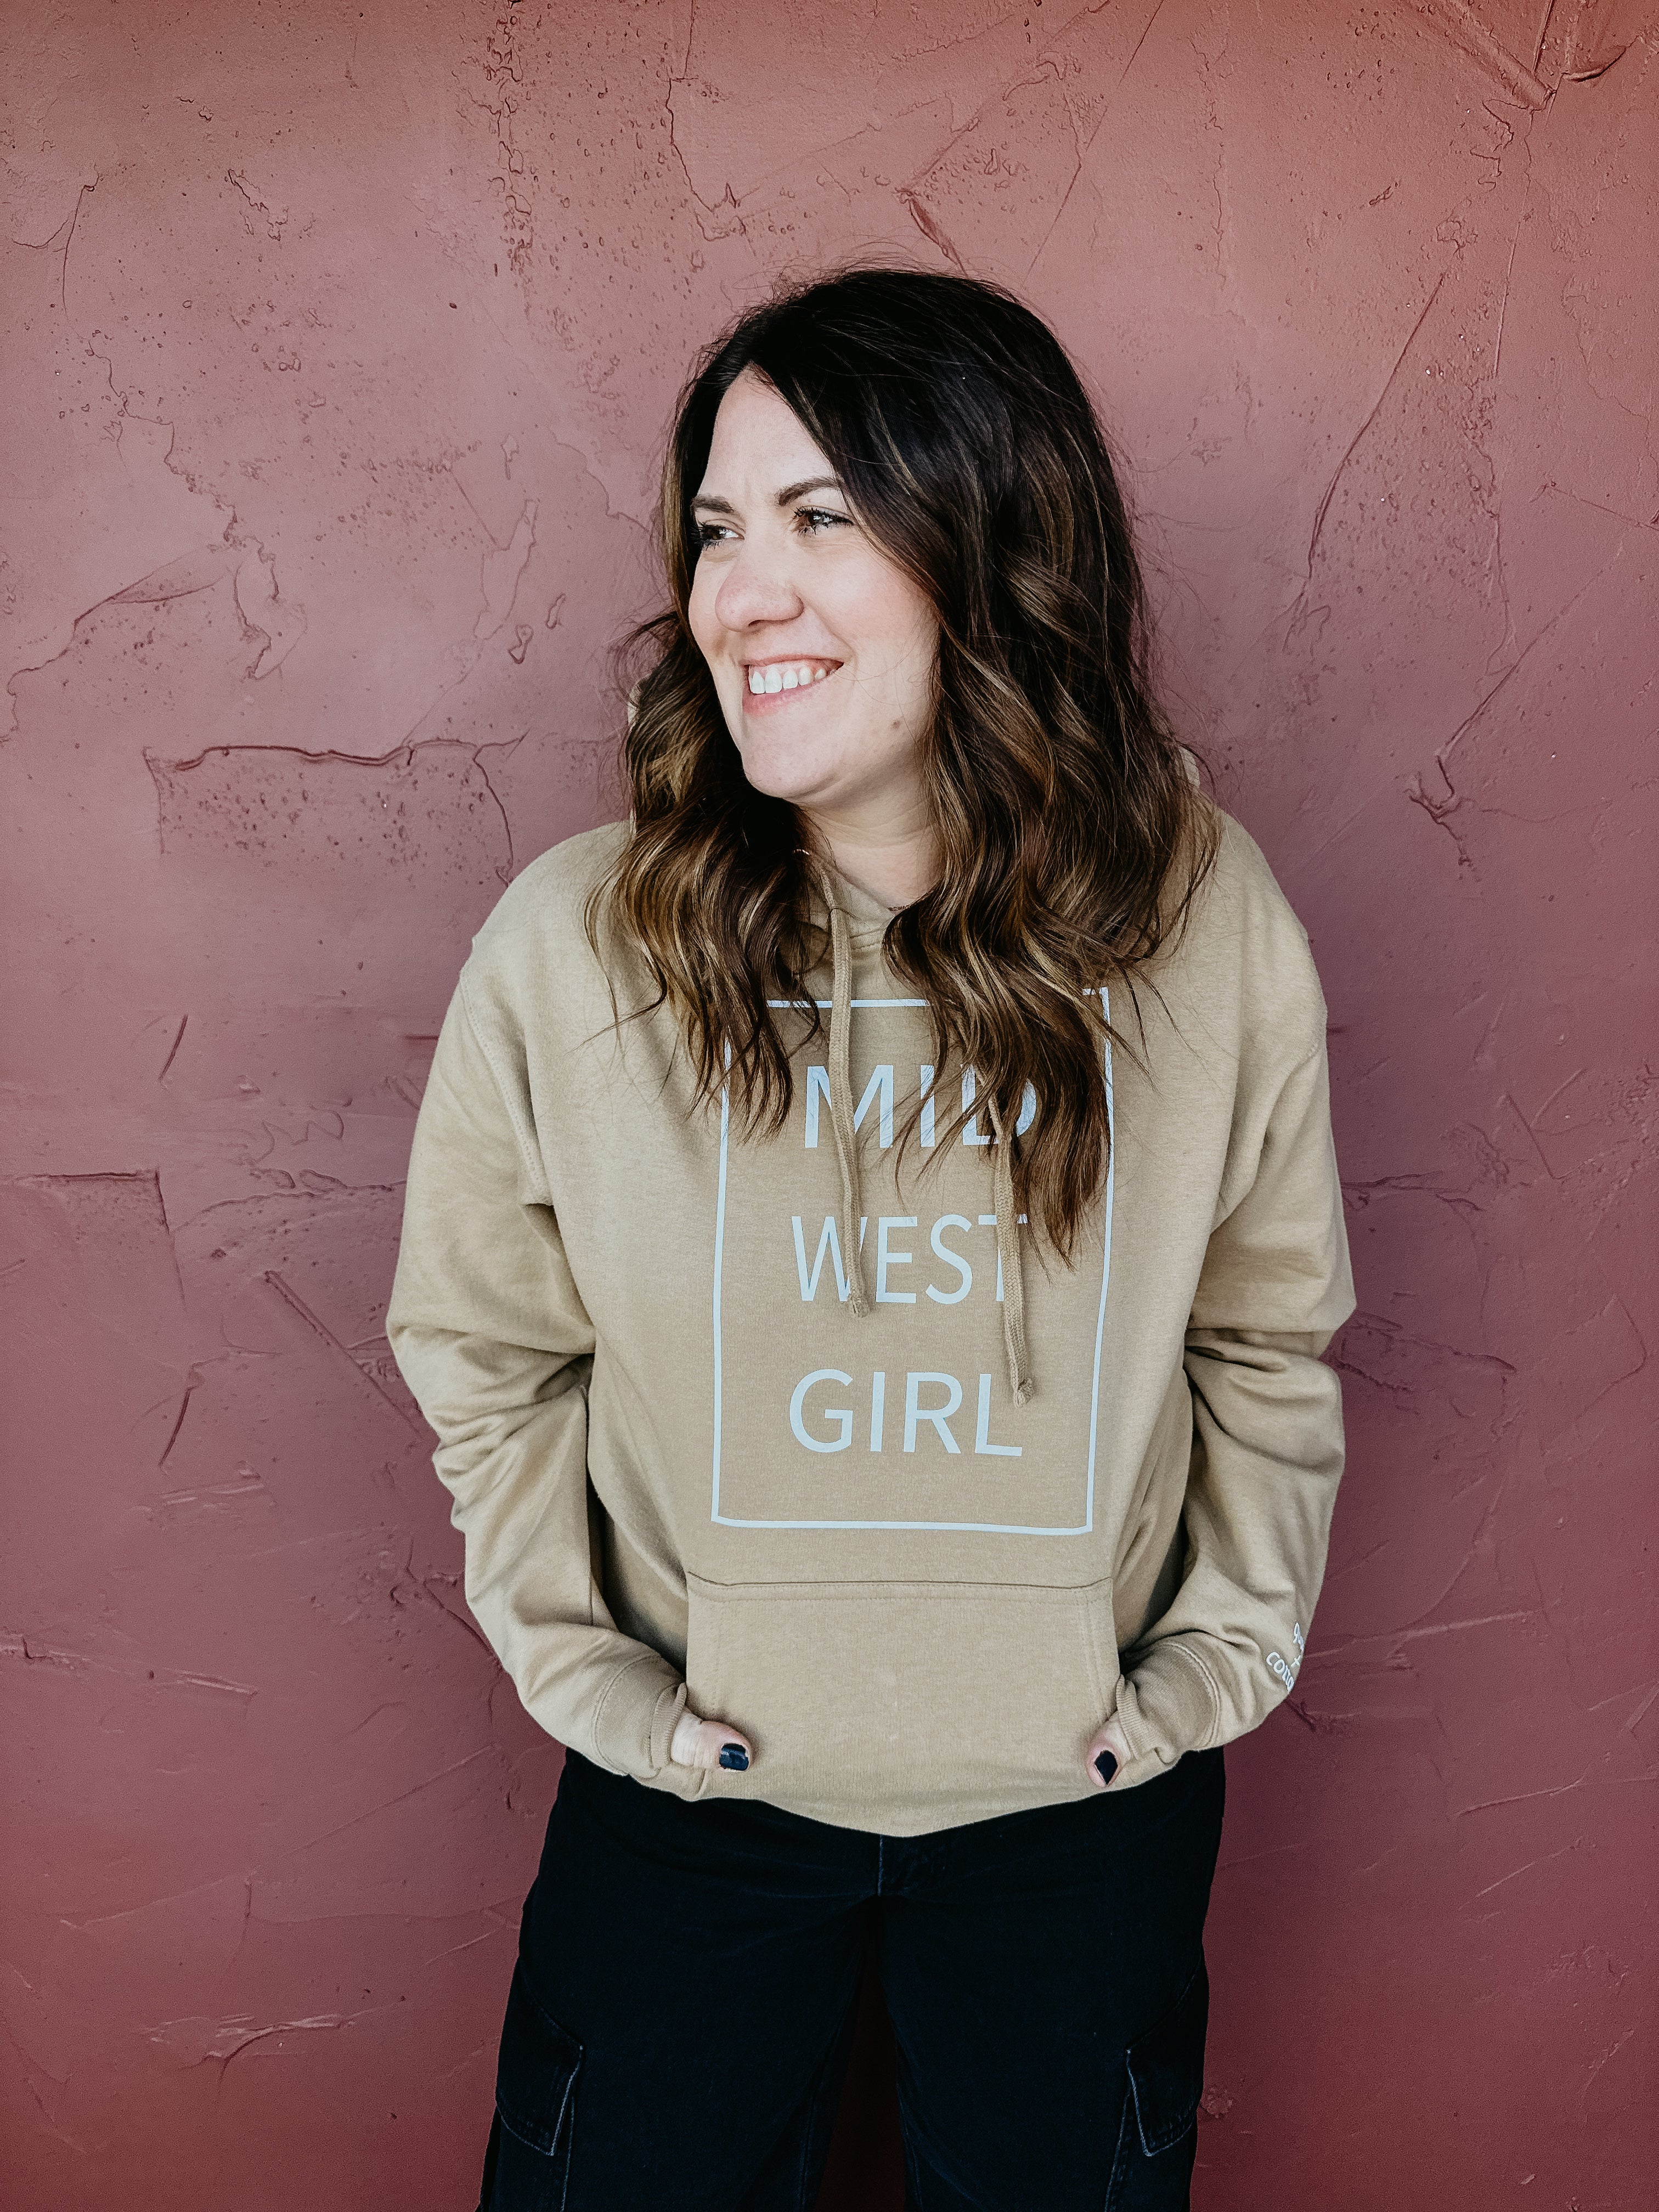 the Midwest Girl Hoodie